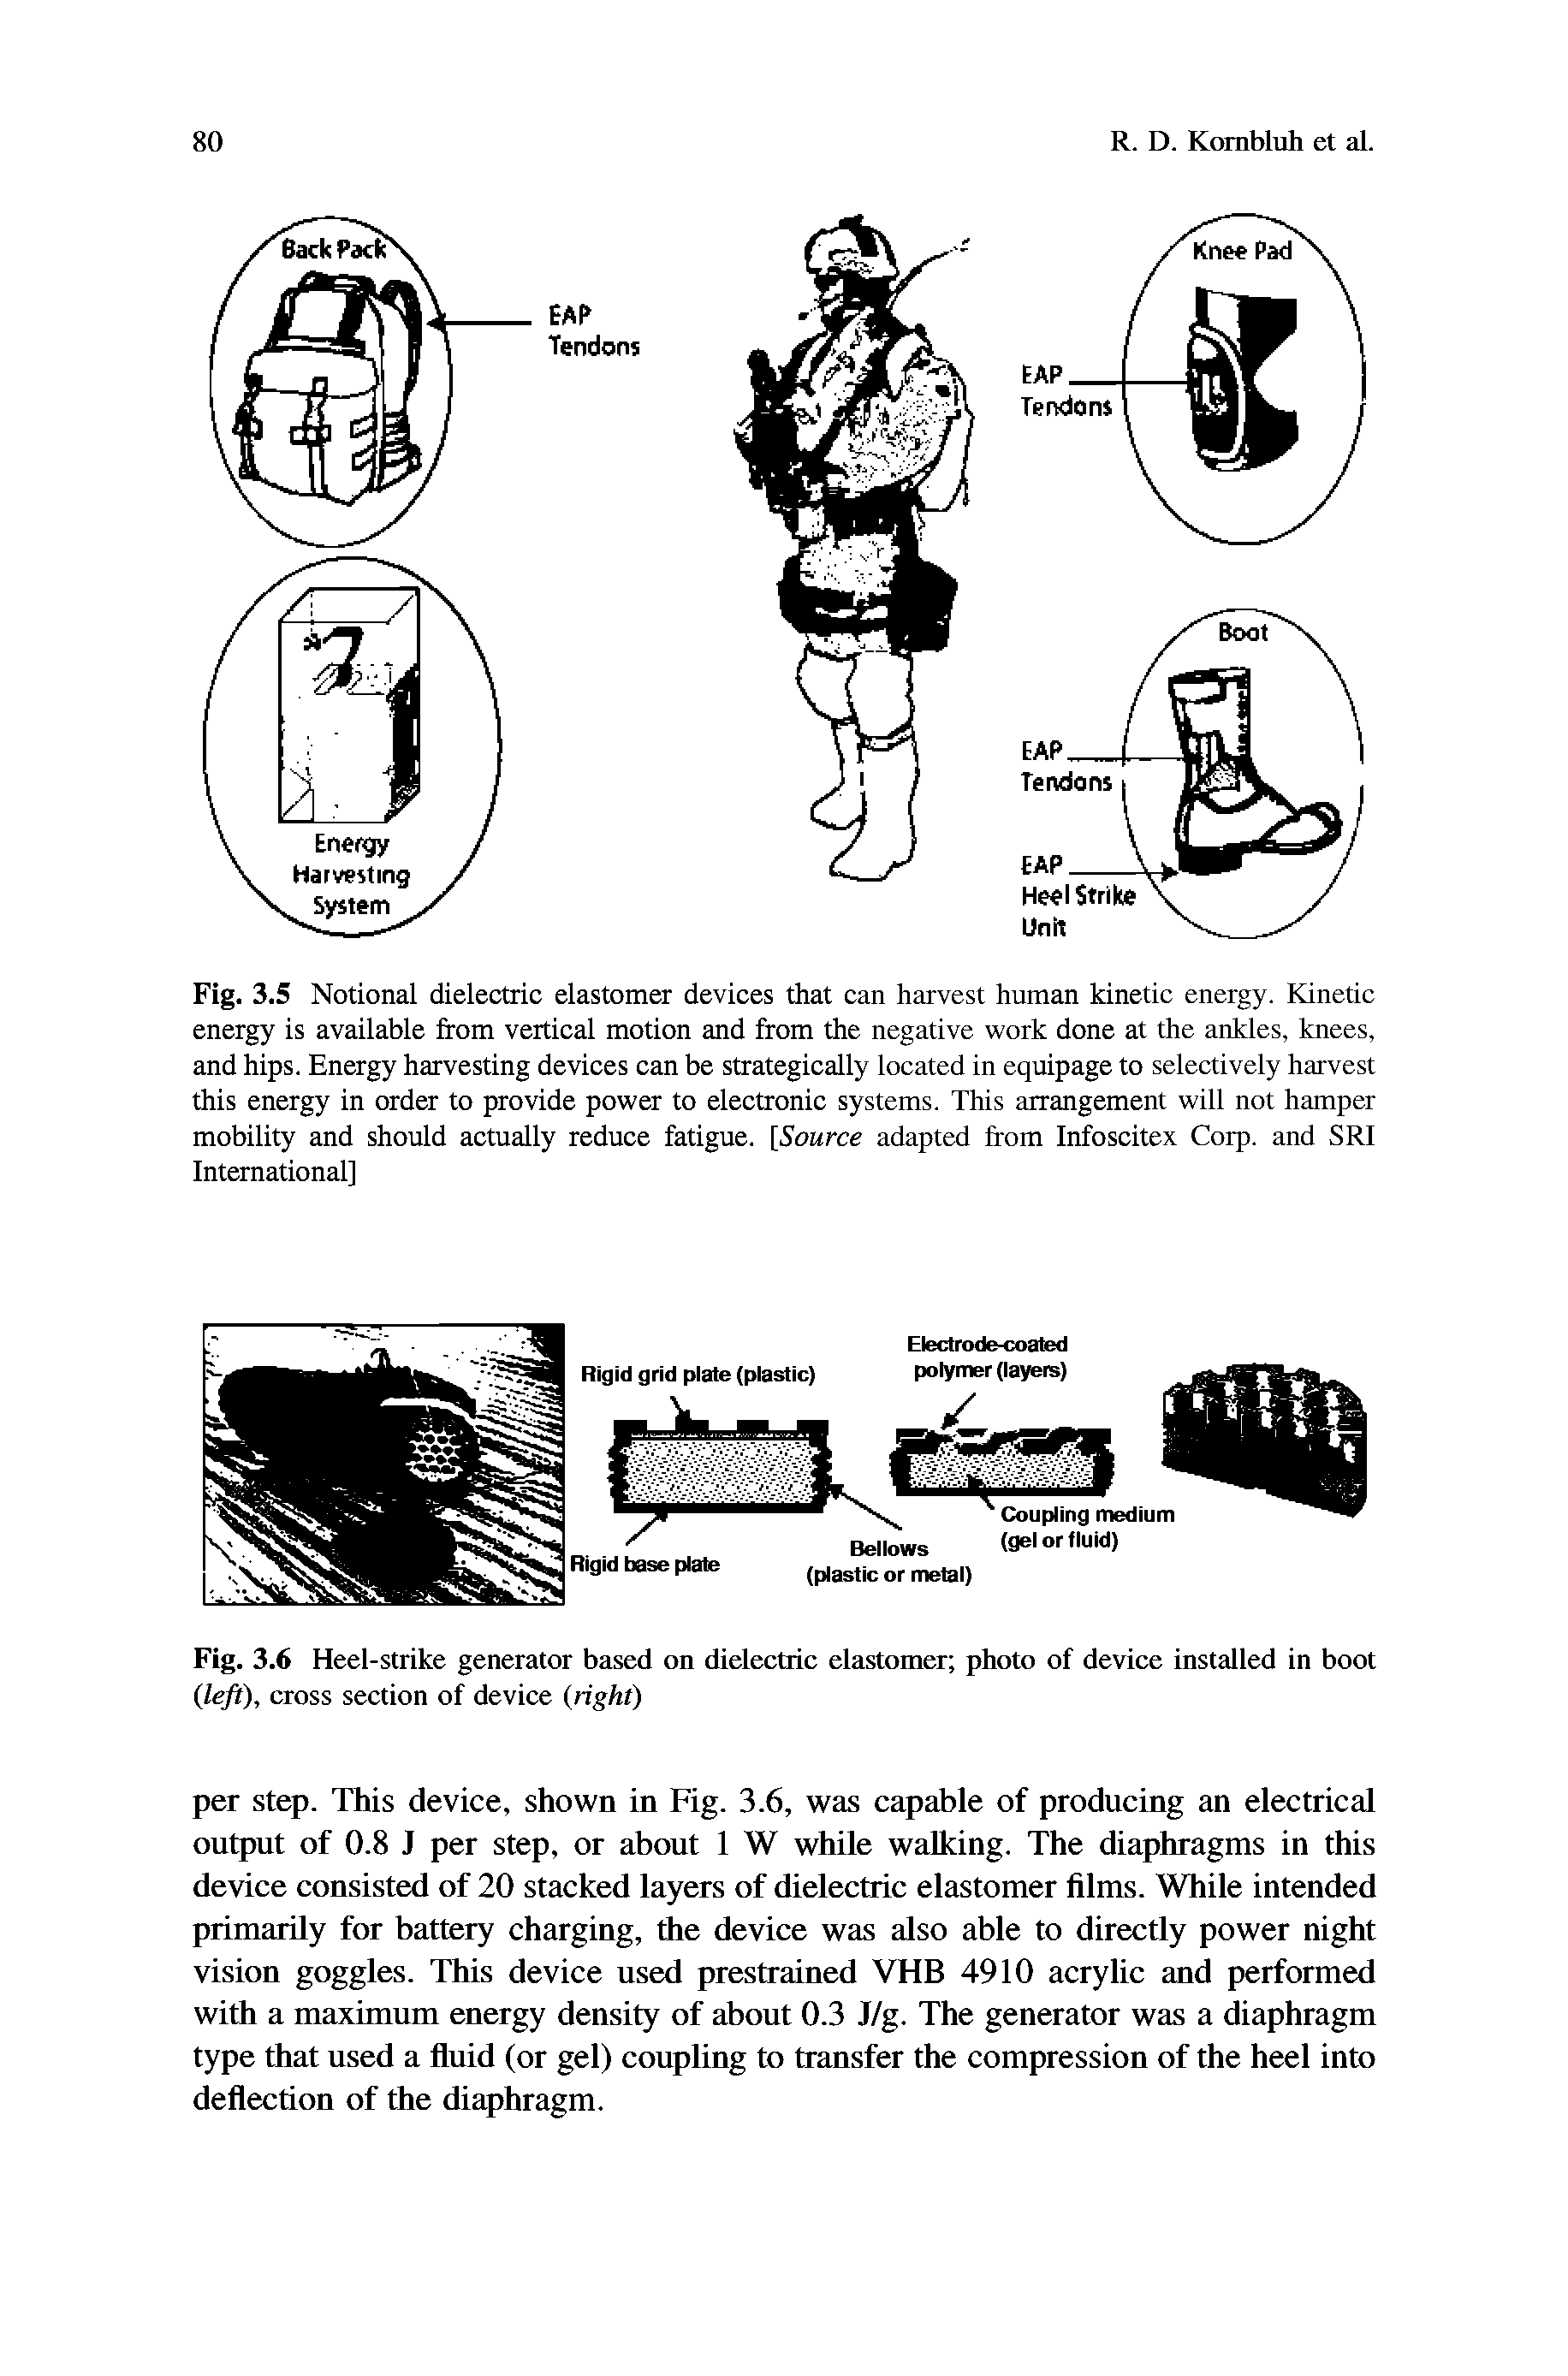 Fig. 3.5 Notional dielectric elastomer devices that can harvest human kinetic energy. Kinetic energy is available from vertical motion and from the negative work done at the ankles, knees, and hips. Energy harvesting devices can be strategically located in equipage to selectively harvest this energy in order to provide power to electronic systems. This arrangement will not hamper mobility and should actually reduce fatigue. [Source adapted from Infoscitex Corp. and SRI International]...